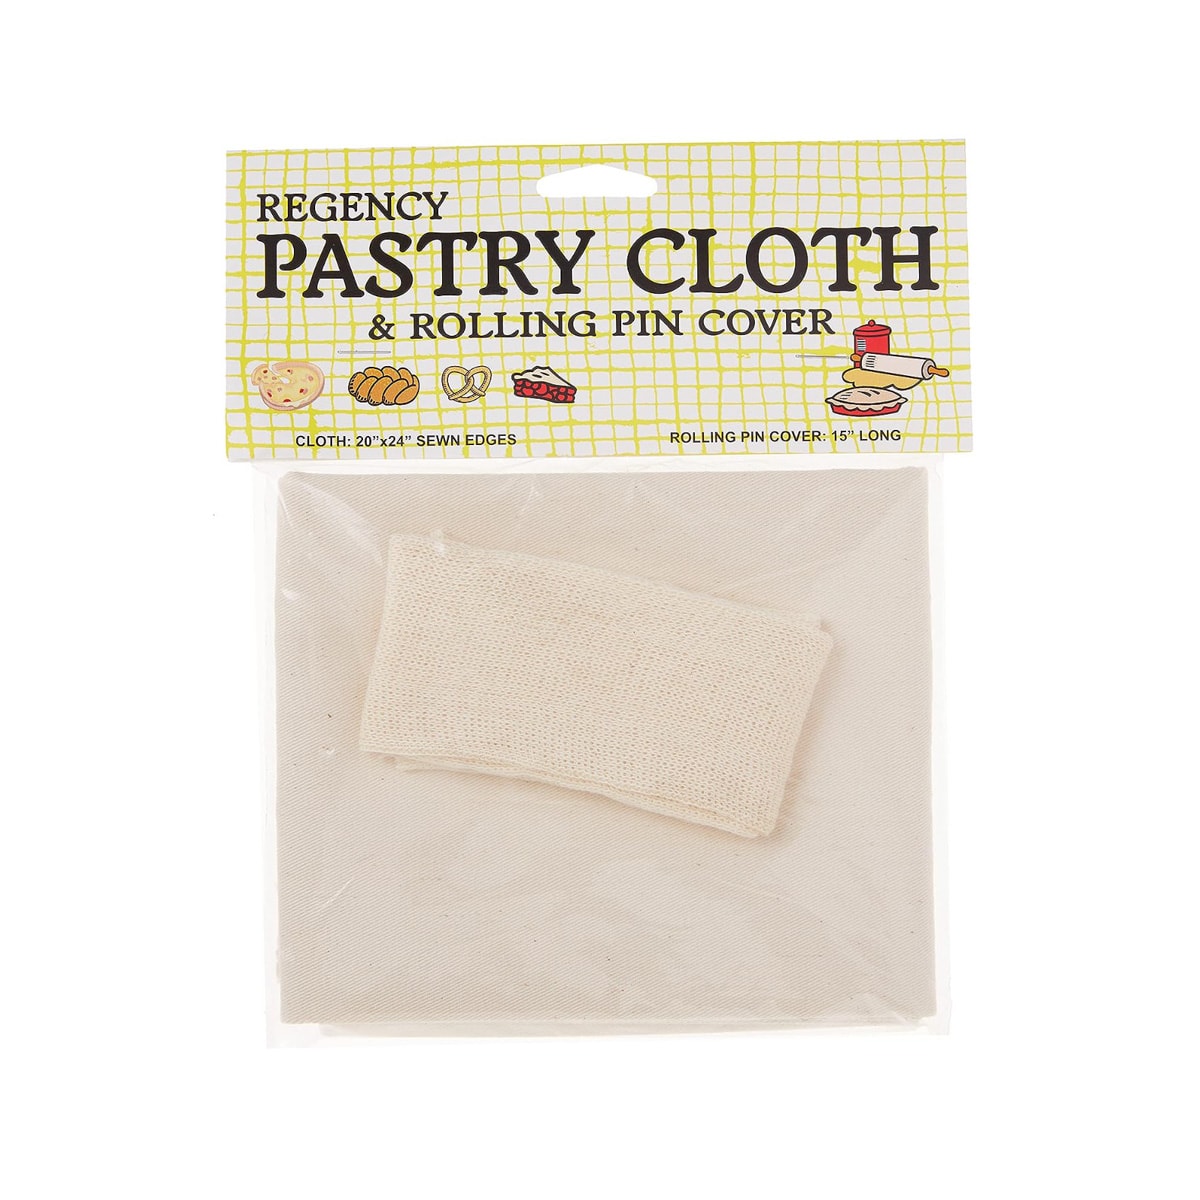 One pastry cloth.